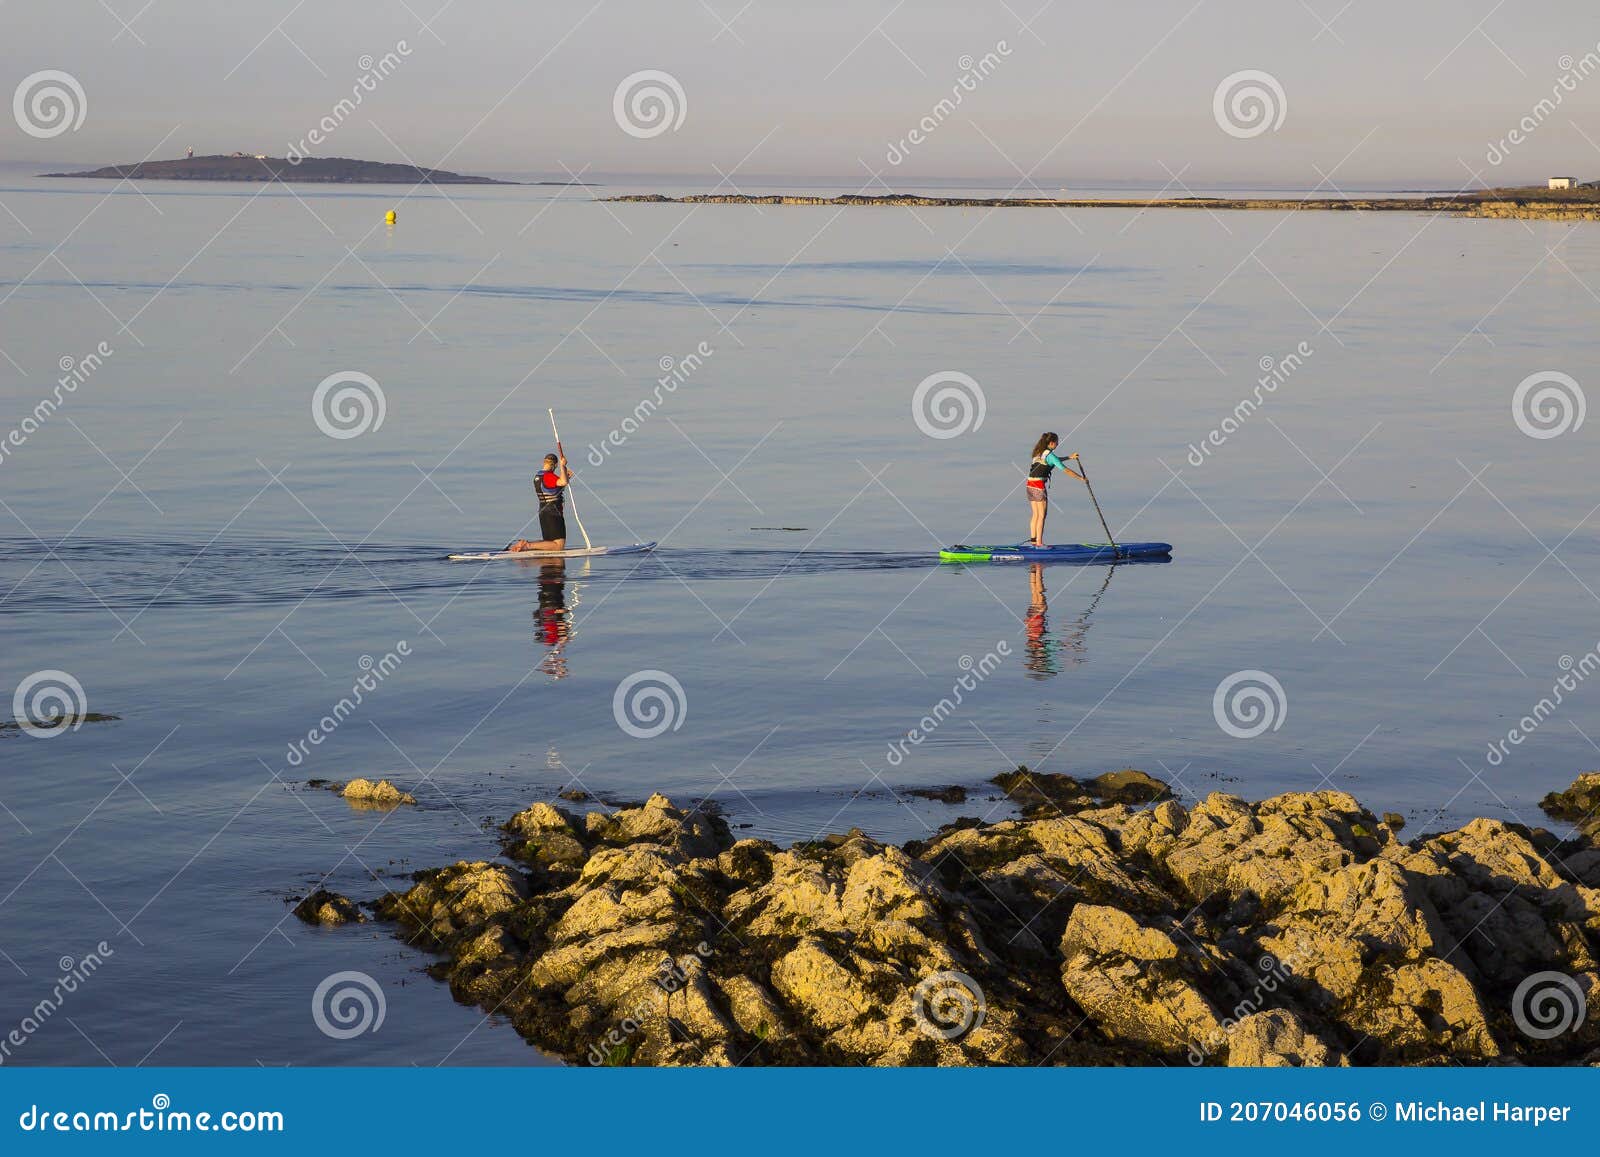 A Couple Slowly Paddle Their Surf Boards In The Calm Sea At Groomsport